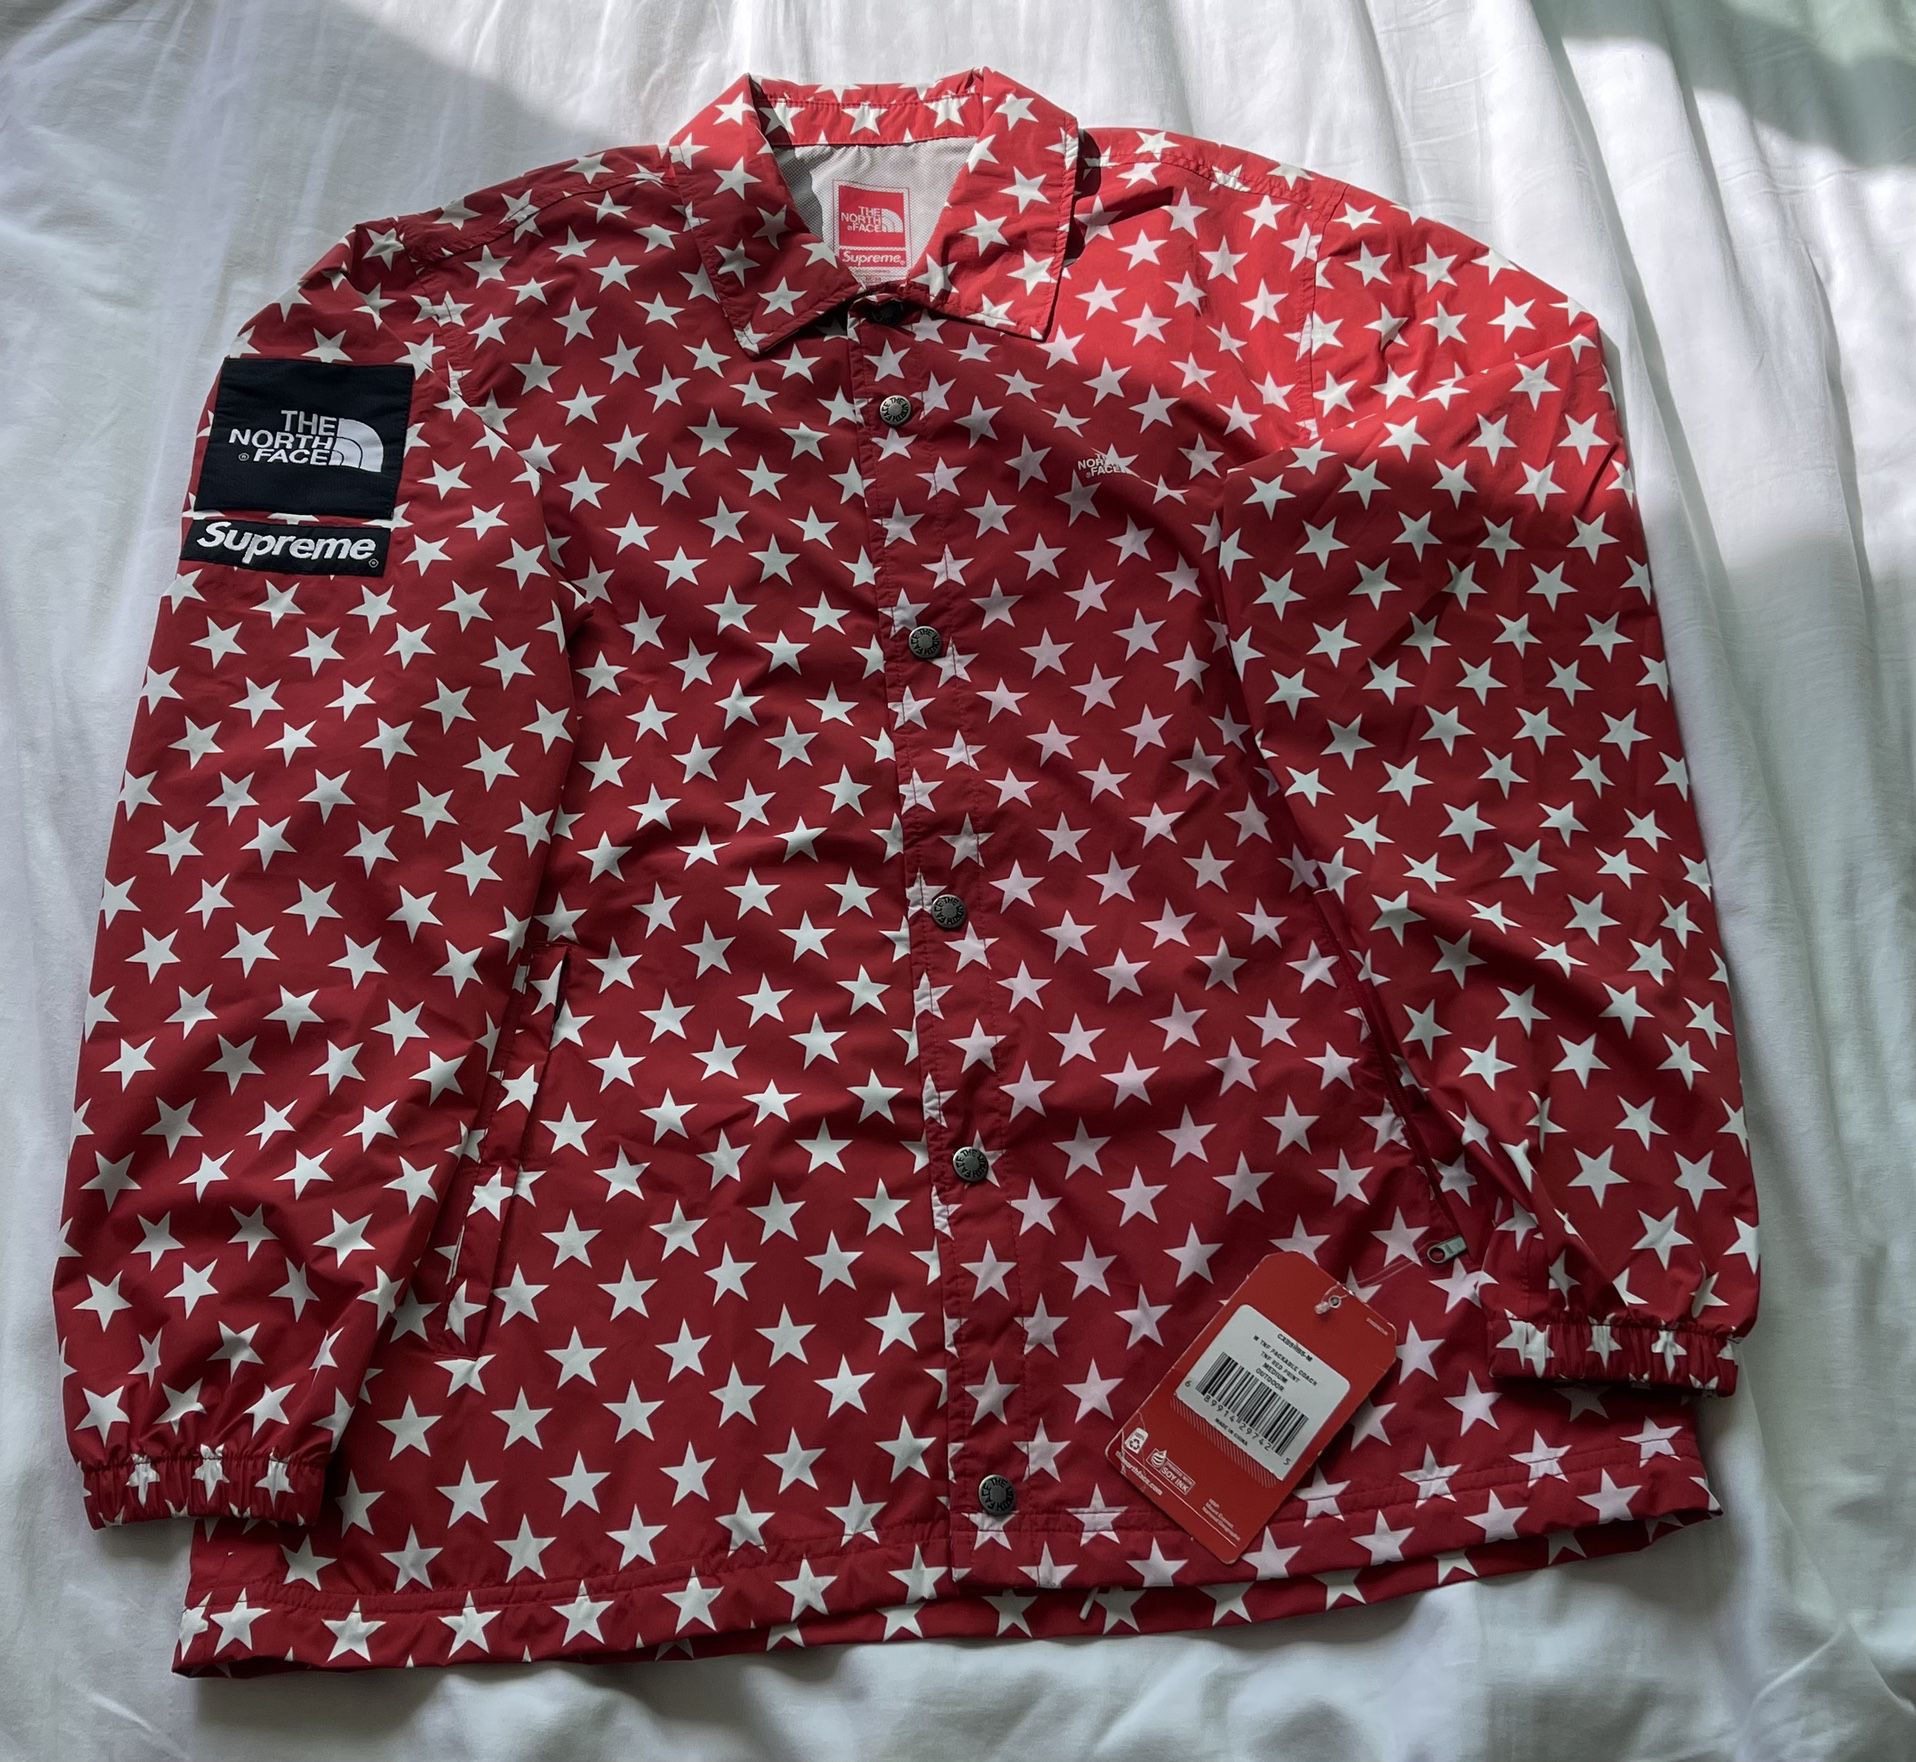 Supreme x The North Face Red Stars Packable Coach Jacket w/Tags! 100% Authentic (2015